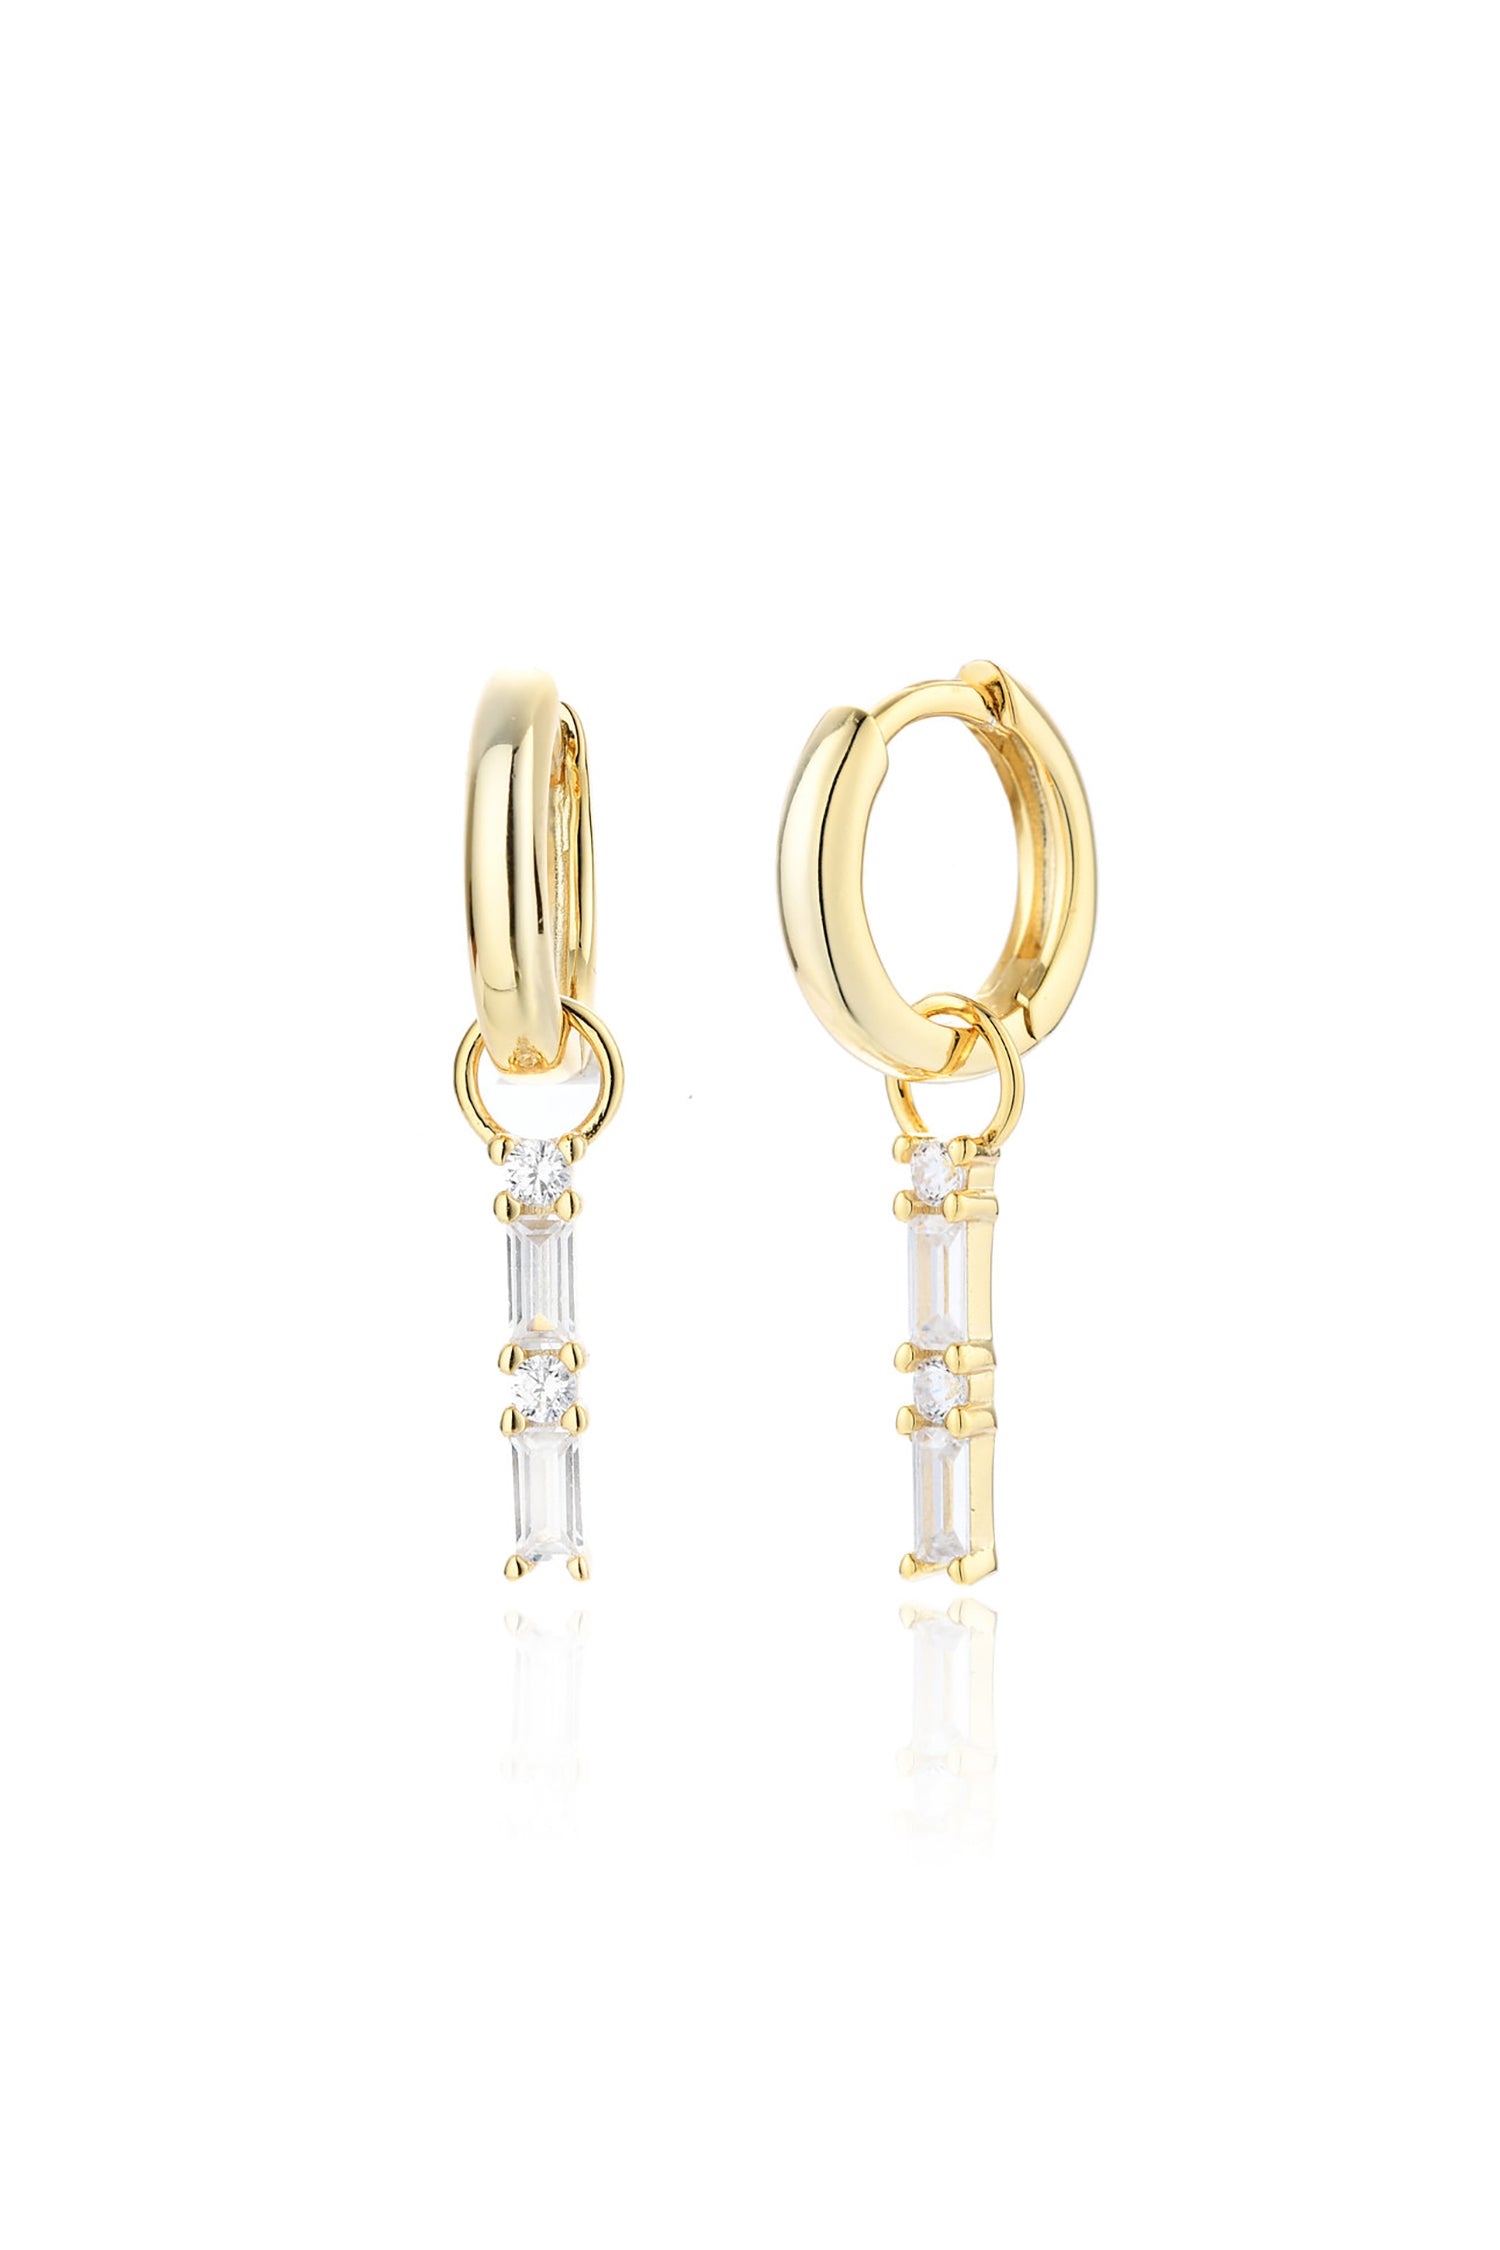  Mini Crystal Charm Hoop Earrings 14k Gold Plated Sterling Silver White Background Mini Crystal Charm Hoop Earrings 14k Gold Plated Sterling Silver White Background